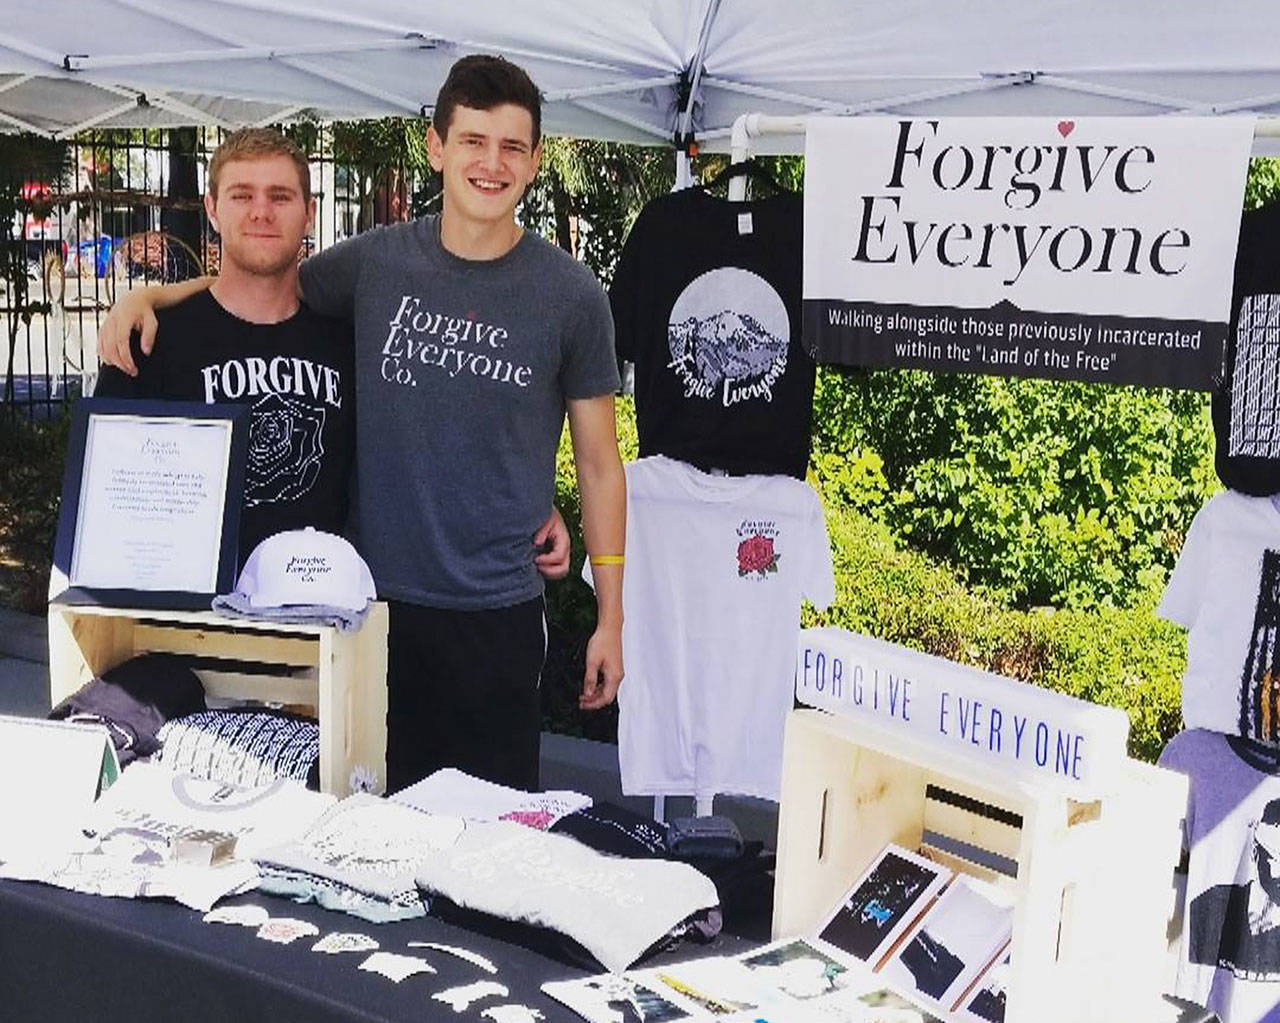 Sky Rich, right, with his friend Brian Kimberling, who was helping sell Forgive Everyone Co. gear at the recent Happy Market on Pacific Avenue in Tacoma. Photo courtesy Sky Rich